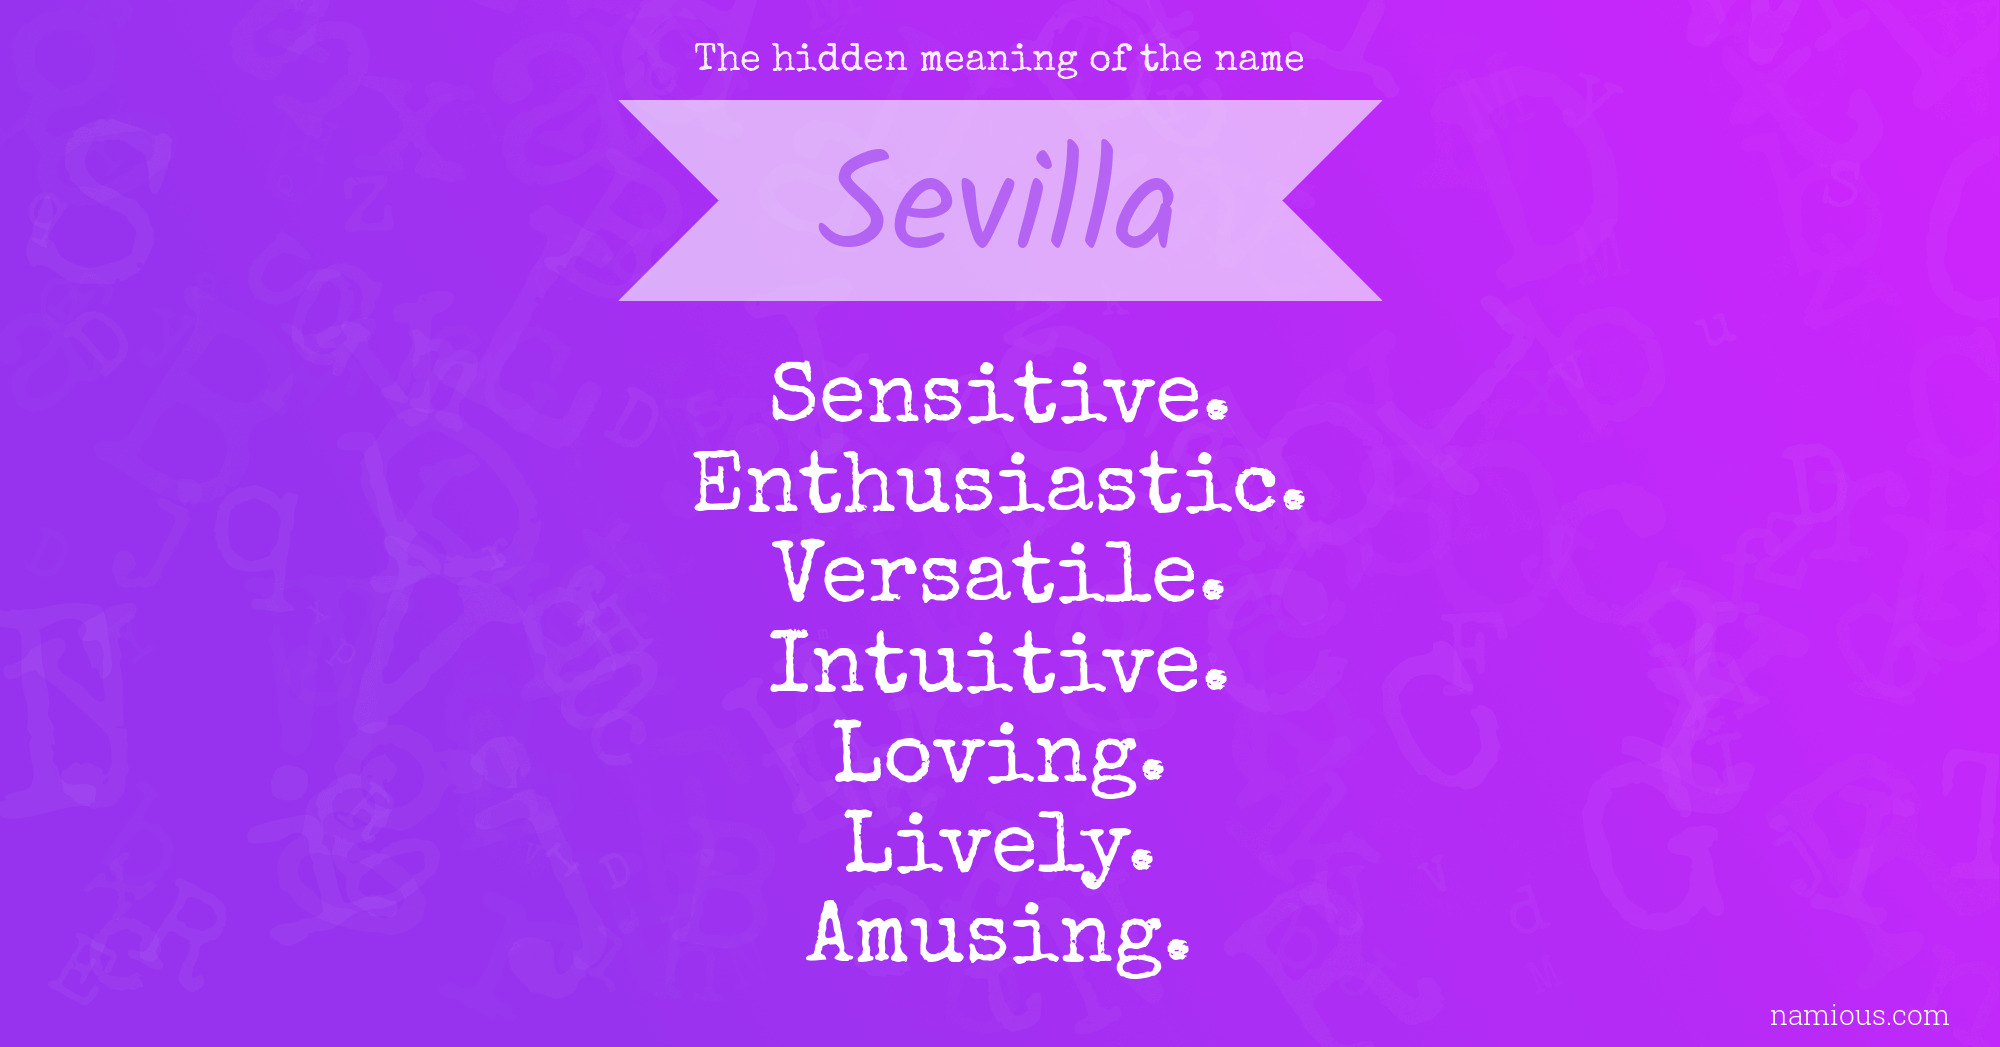 The hidden meaning of the name Sevilla